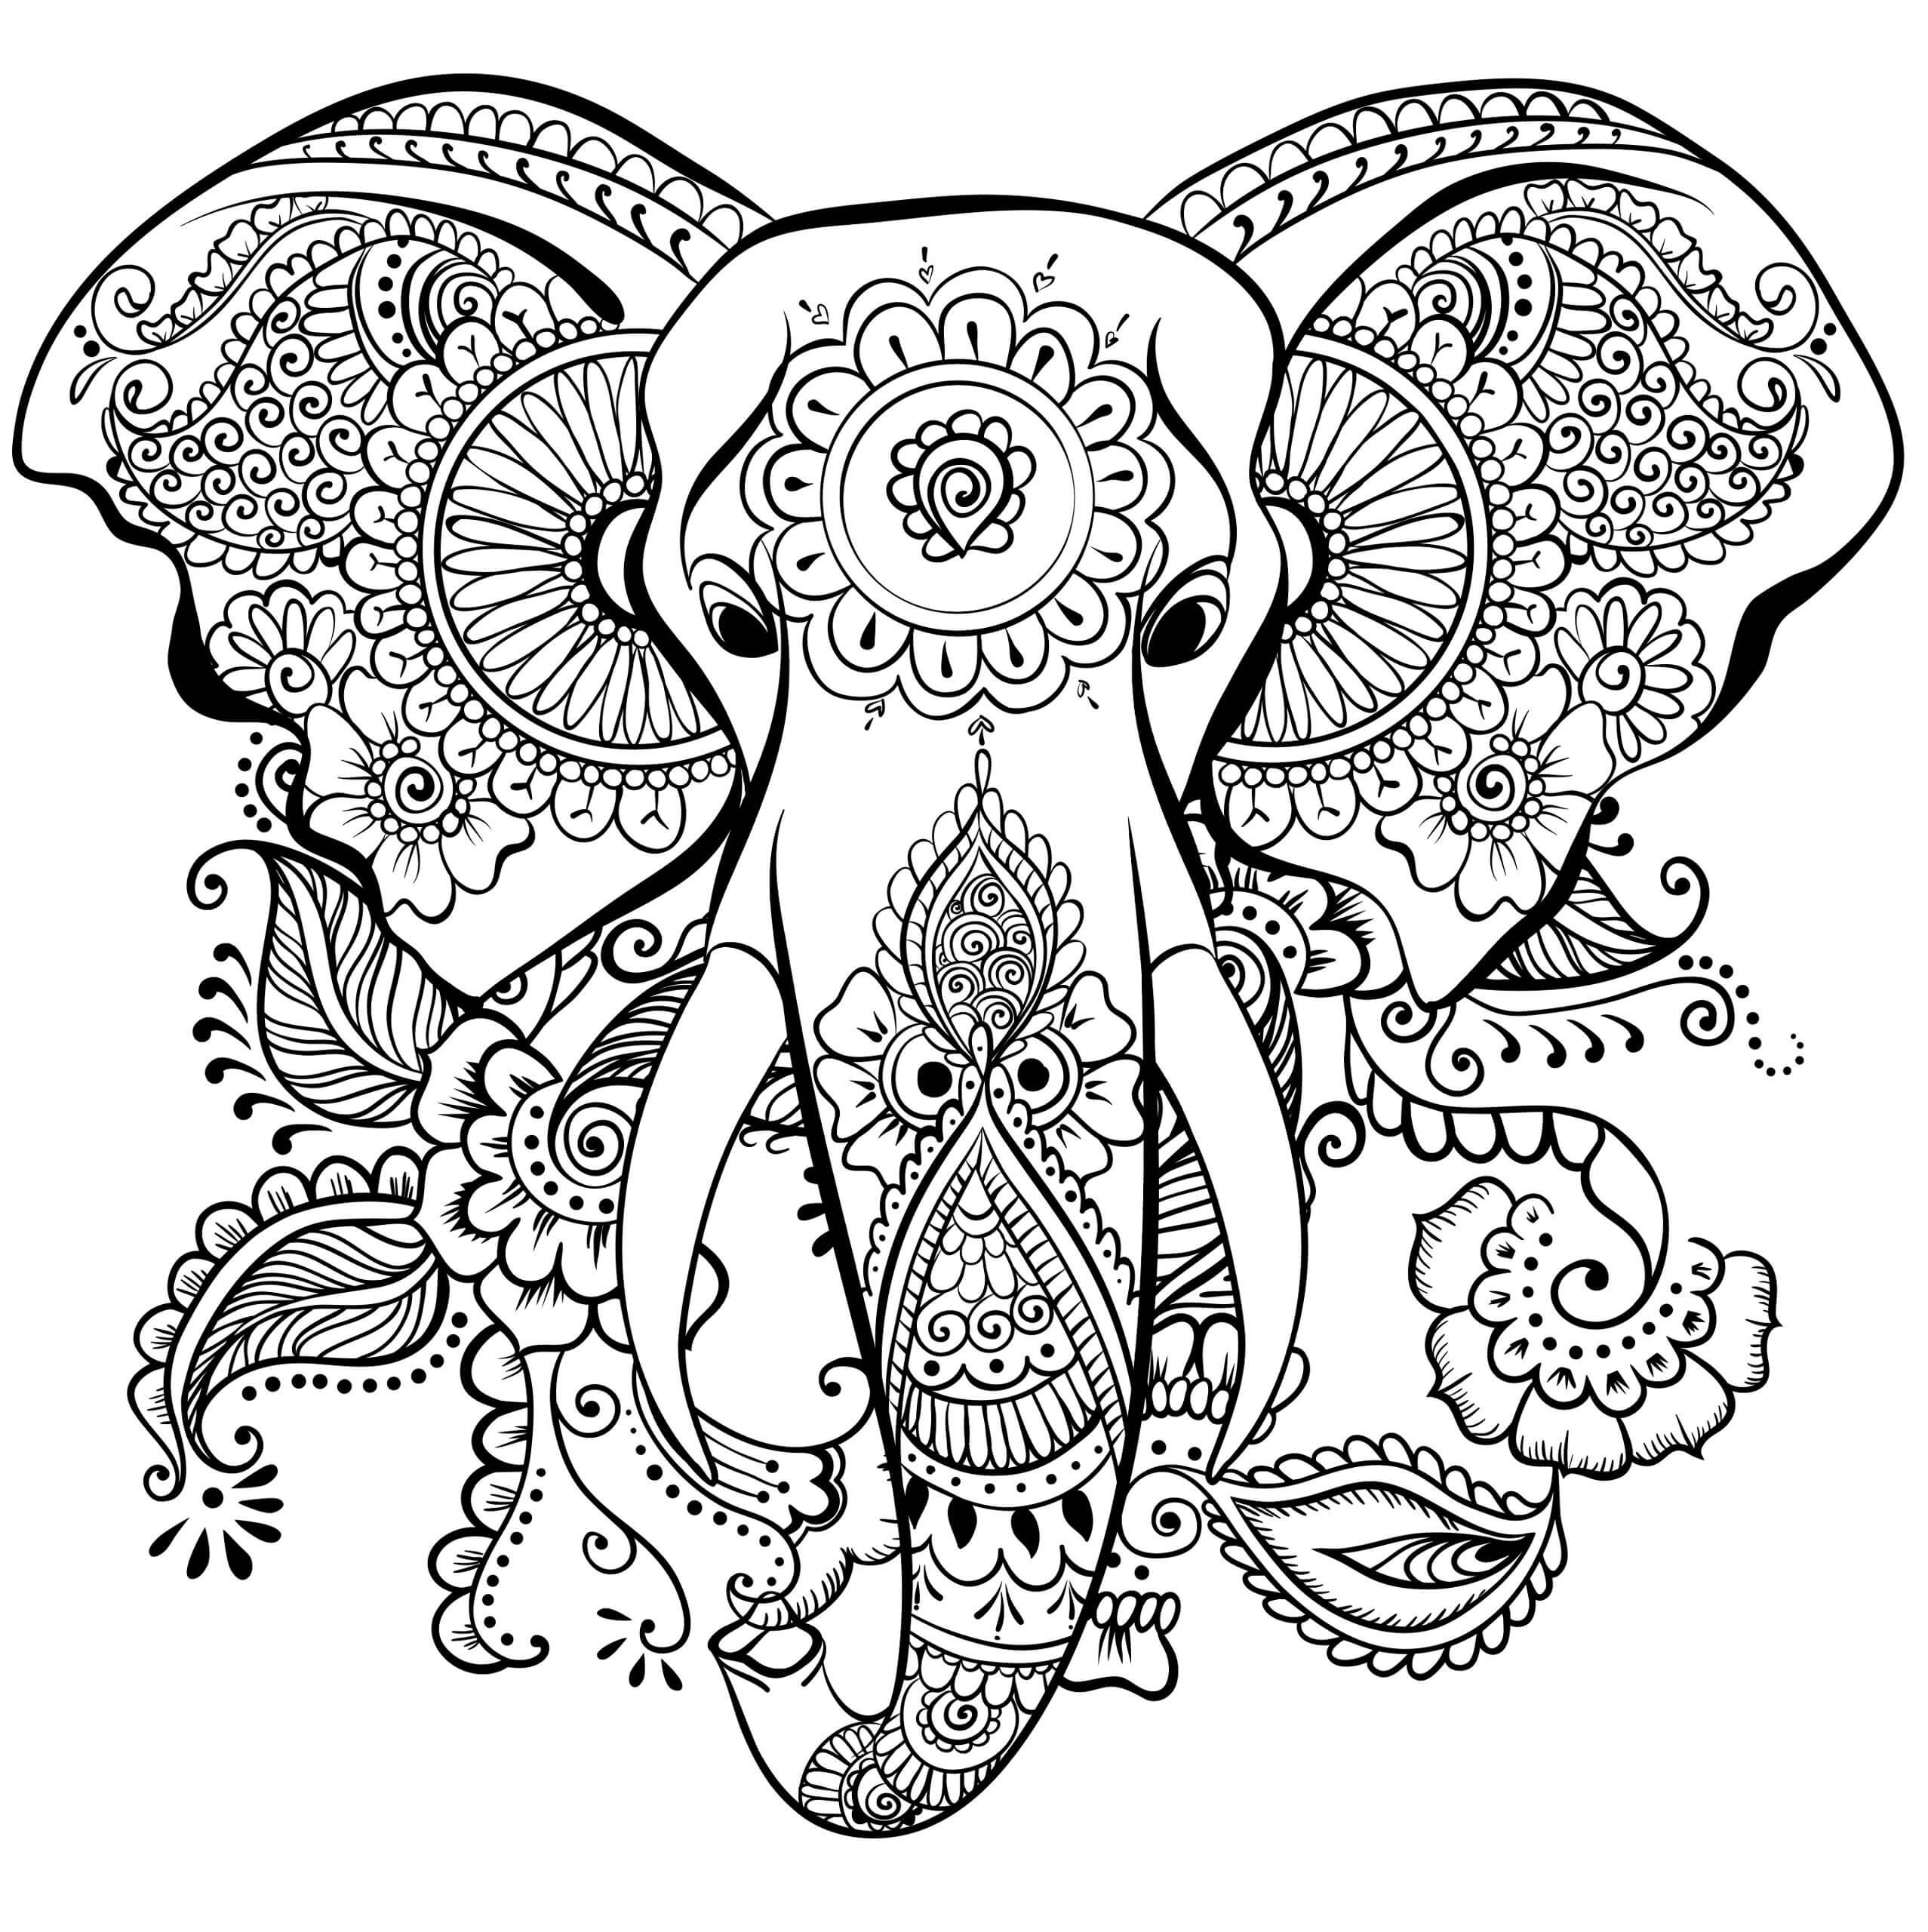 Coloring Pages For Adults Difficult Animals
 Coloring Pages For Adults Difficult Animals 7